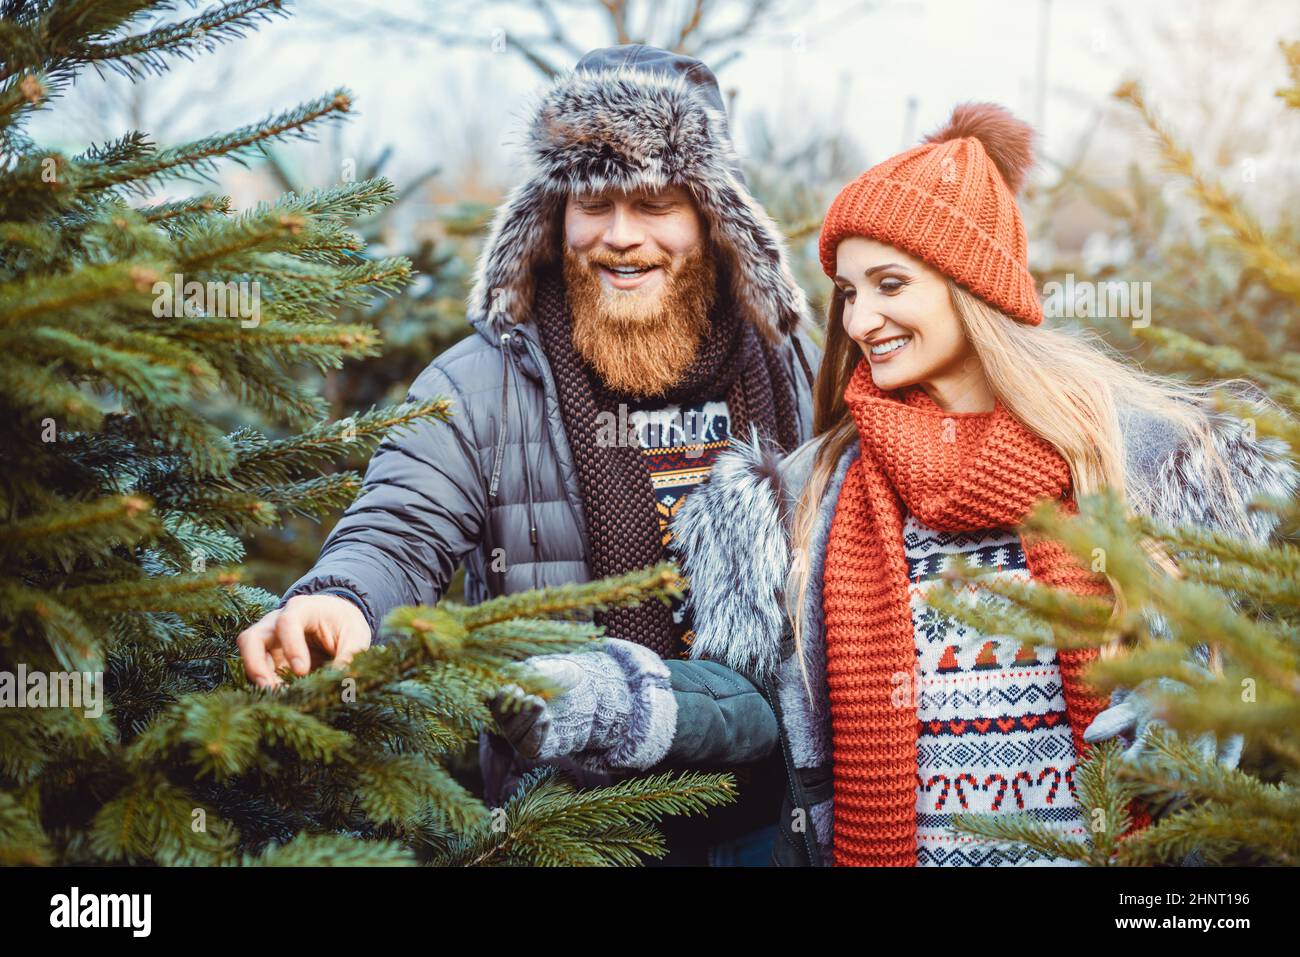 Young woman and man choosing a Christmas tree for their home Stock Photo